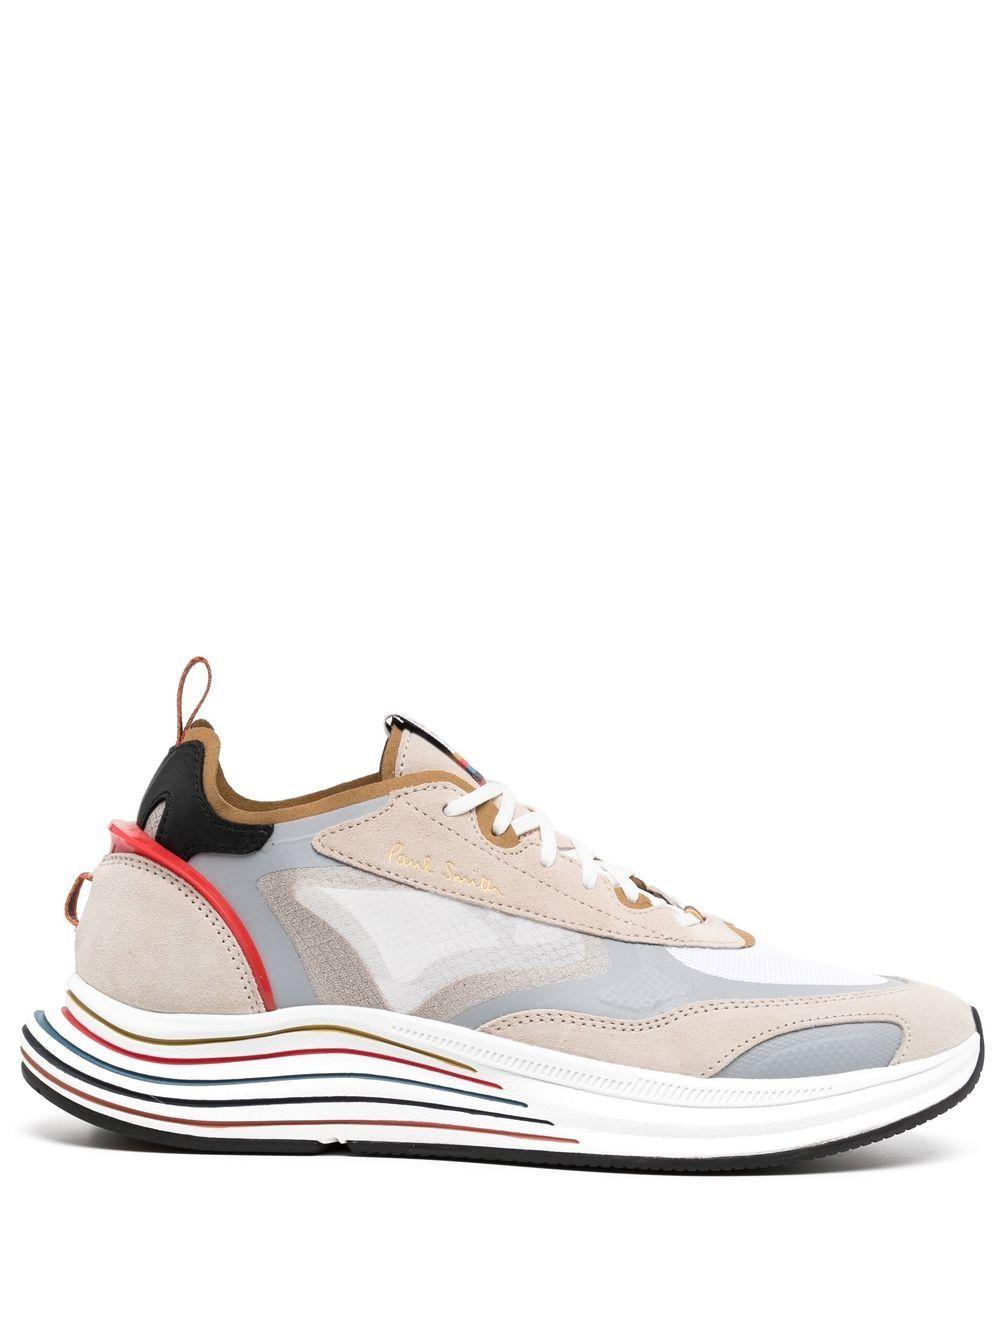 Paul Smith Nagase Colour-block Sneakers in White for Men | Lyst